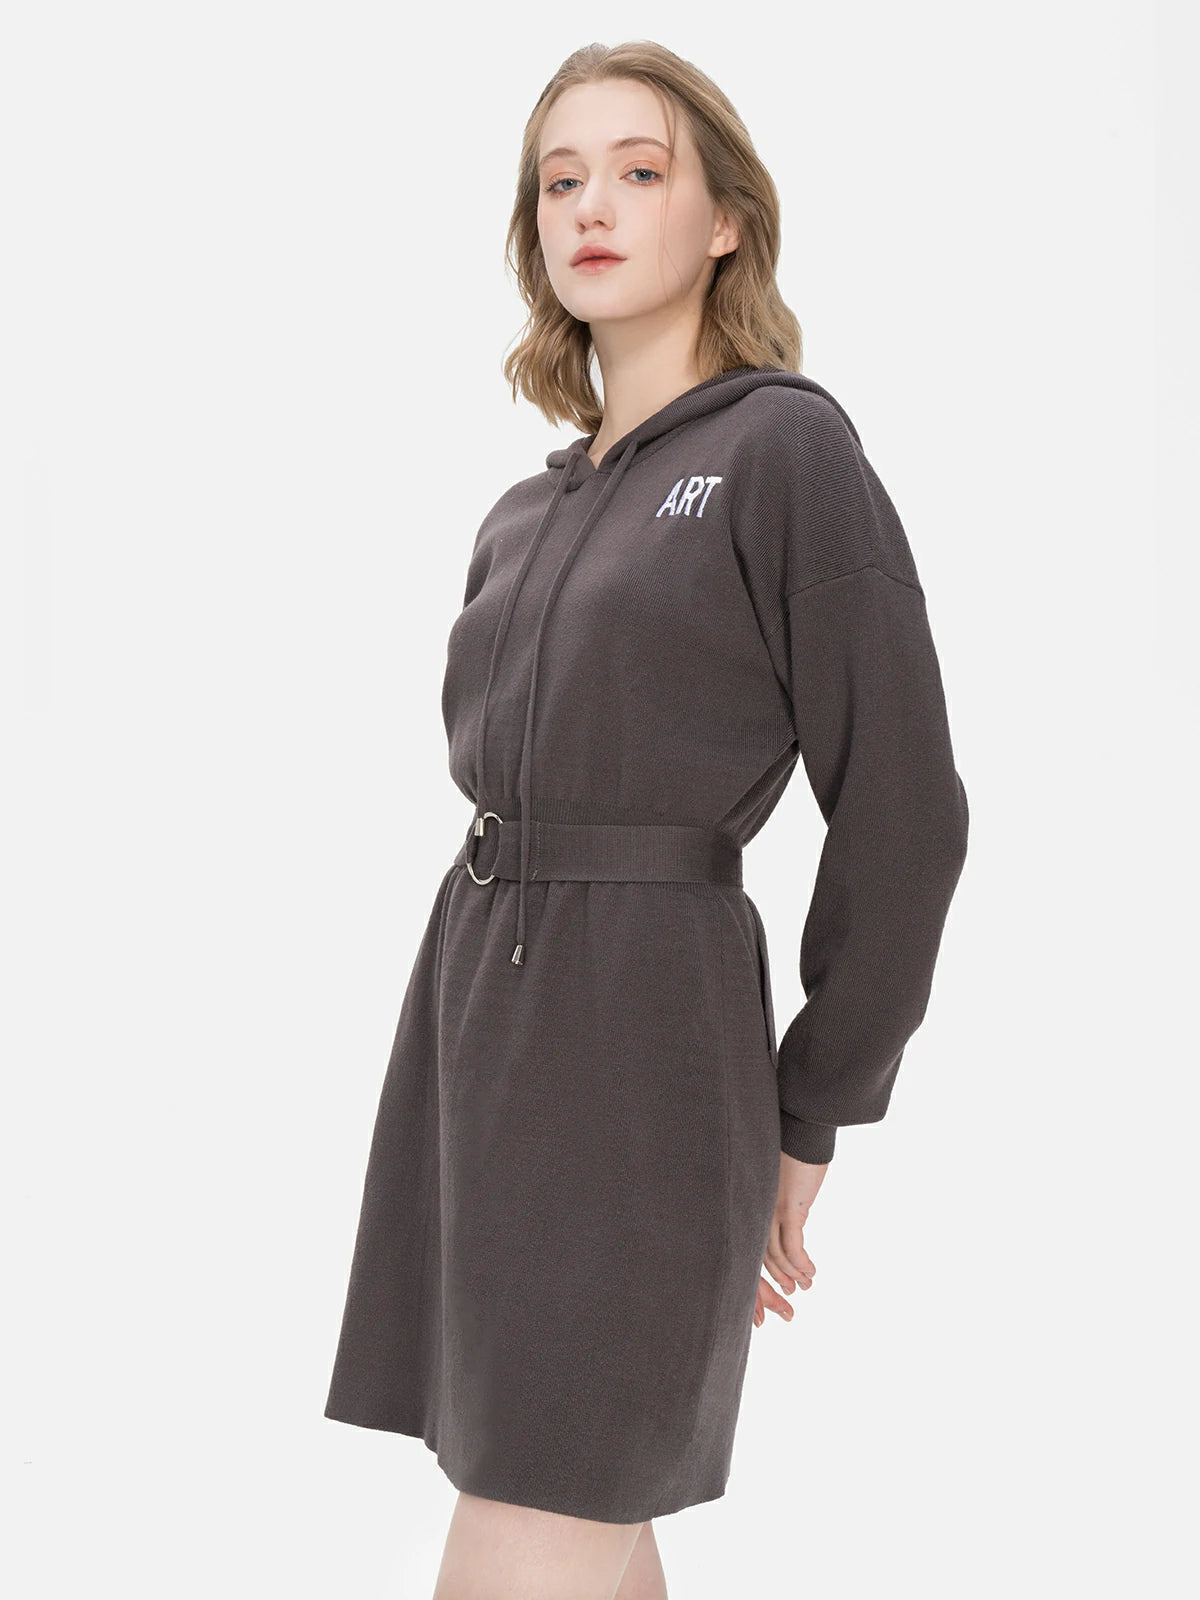 Autumn and winter fashion Hooded knit dress